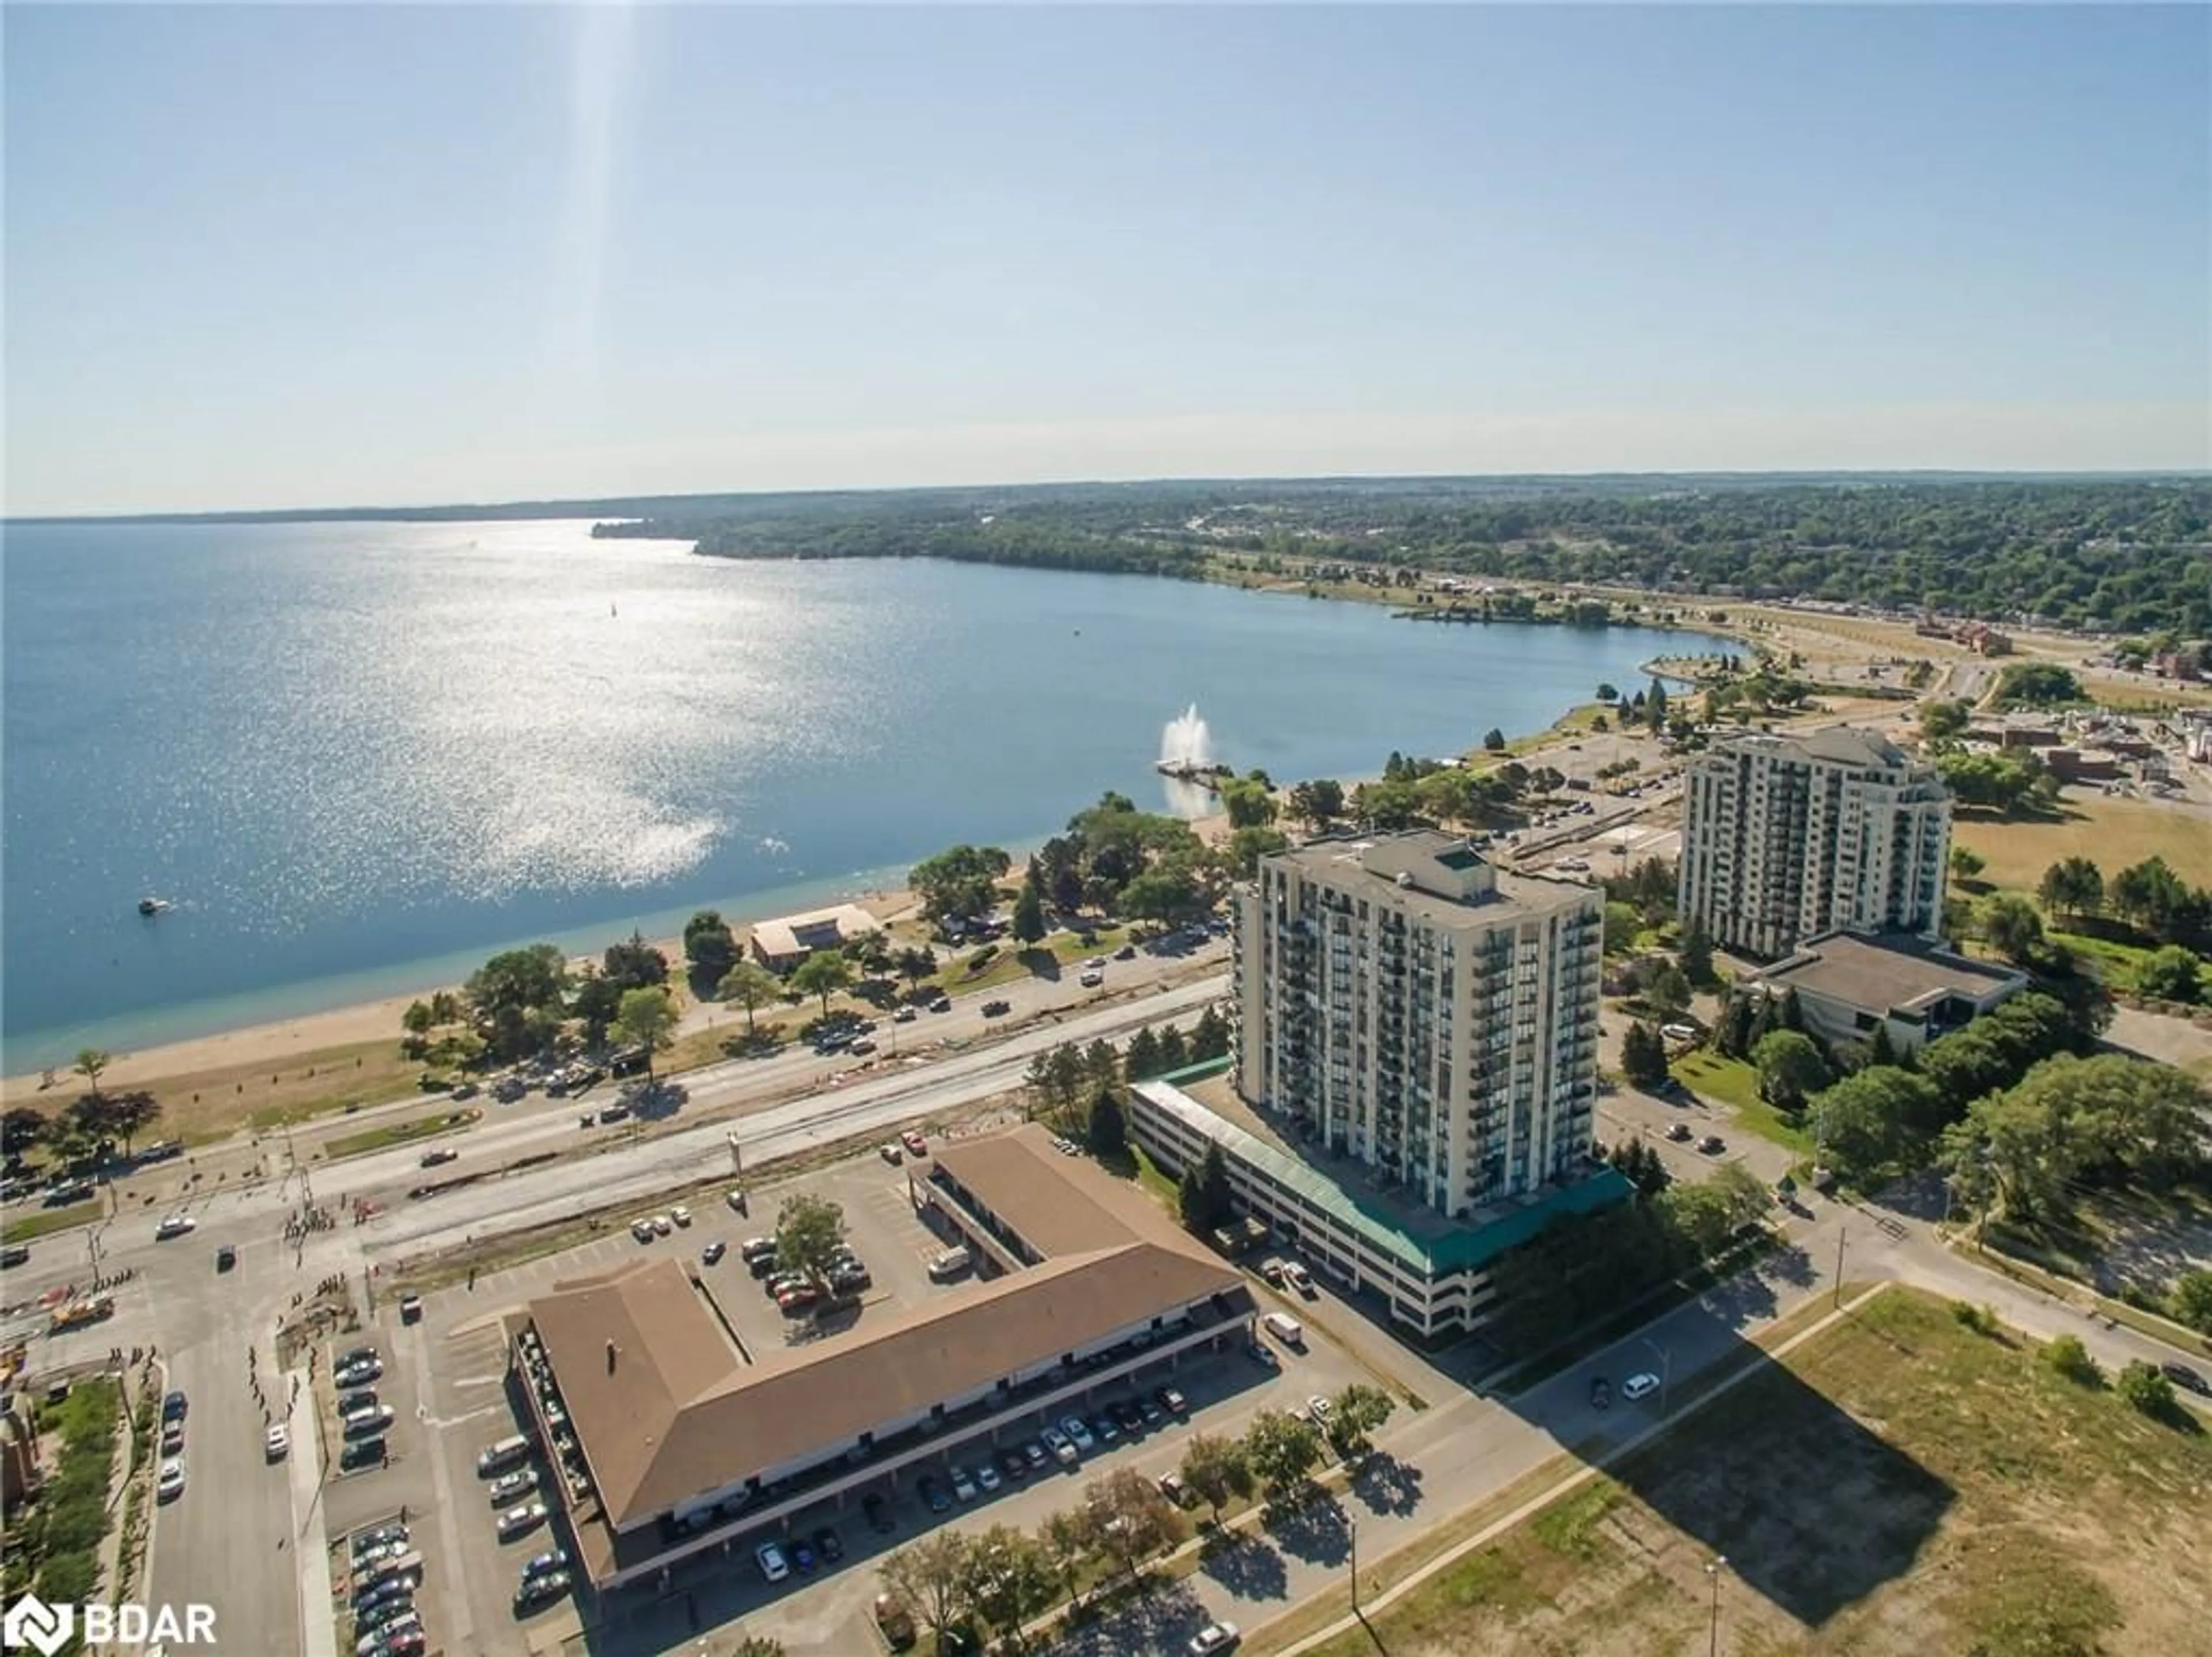 Lakeview for 75 Ellen St #807, Barrie Ontario L4N 7R6